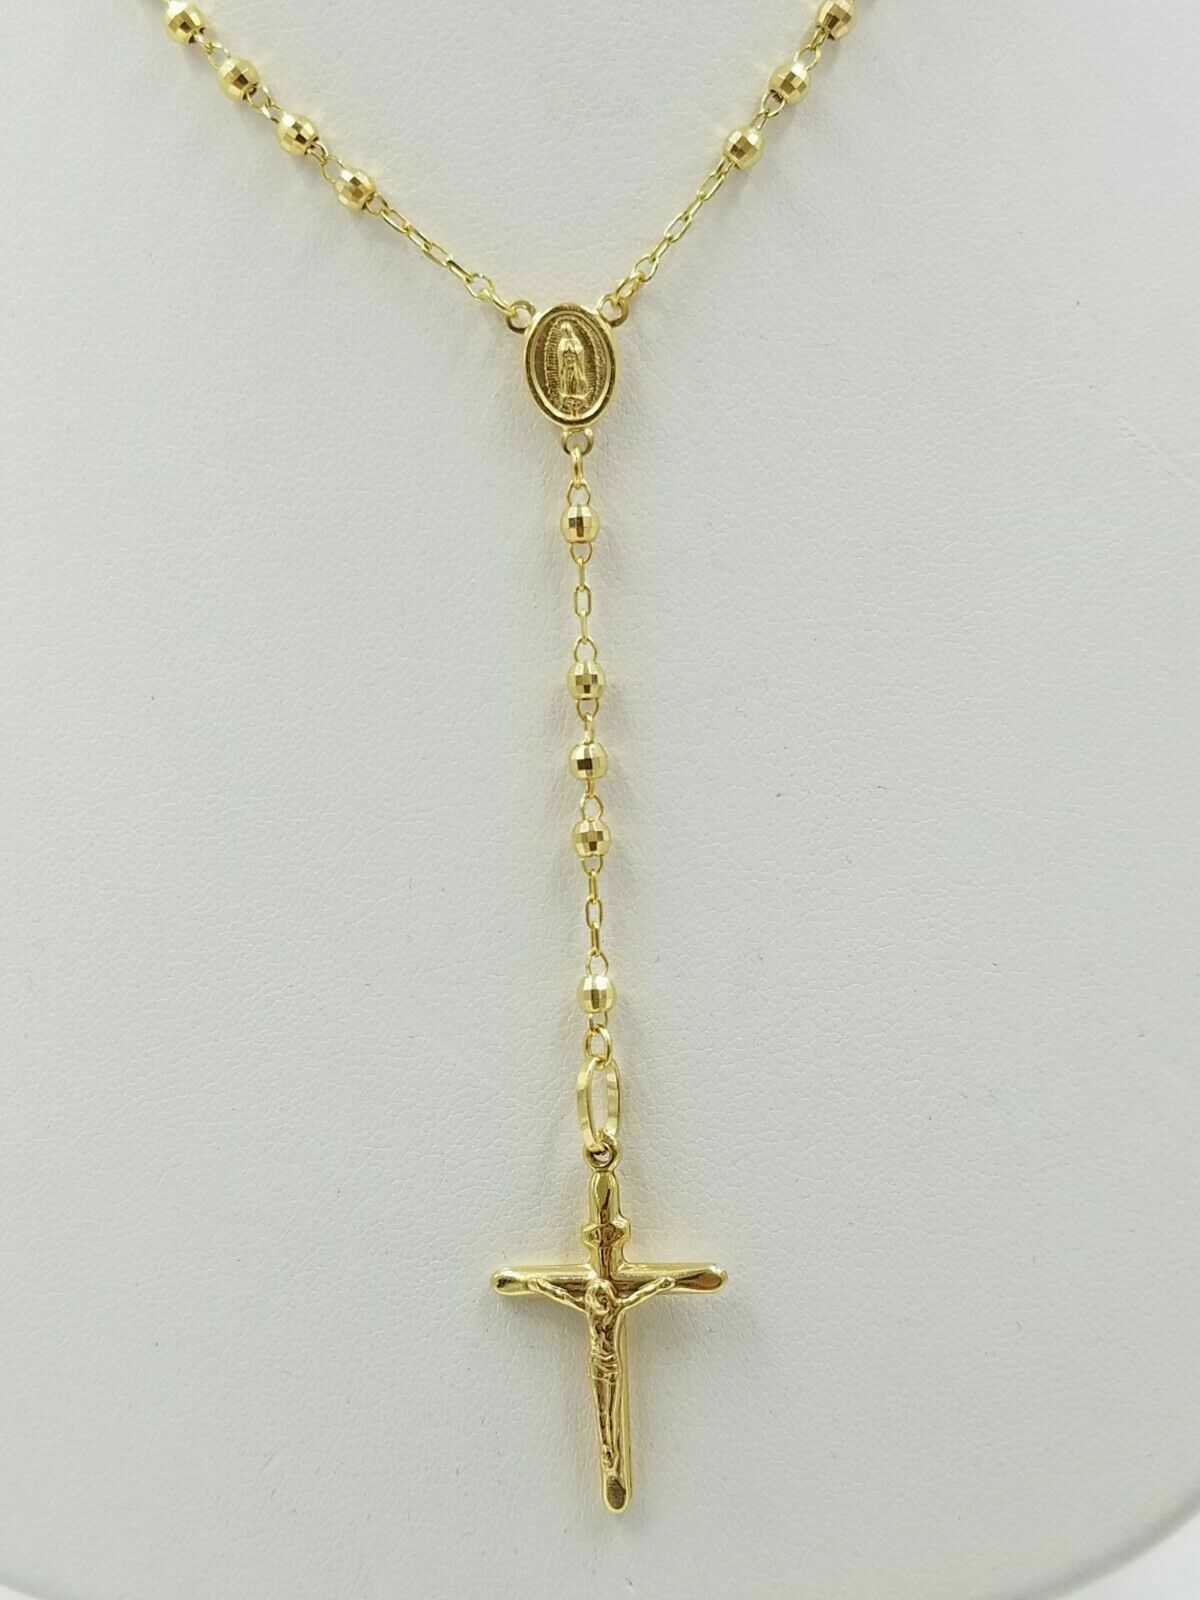 14k Gold Rosary Necklace 18